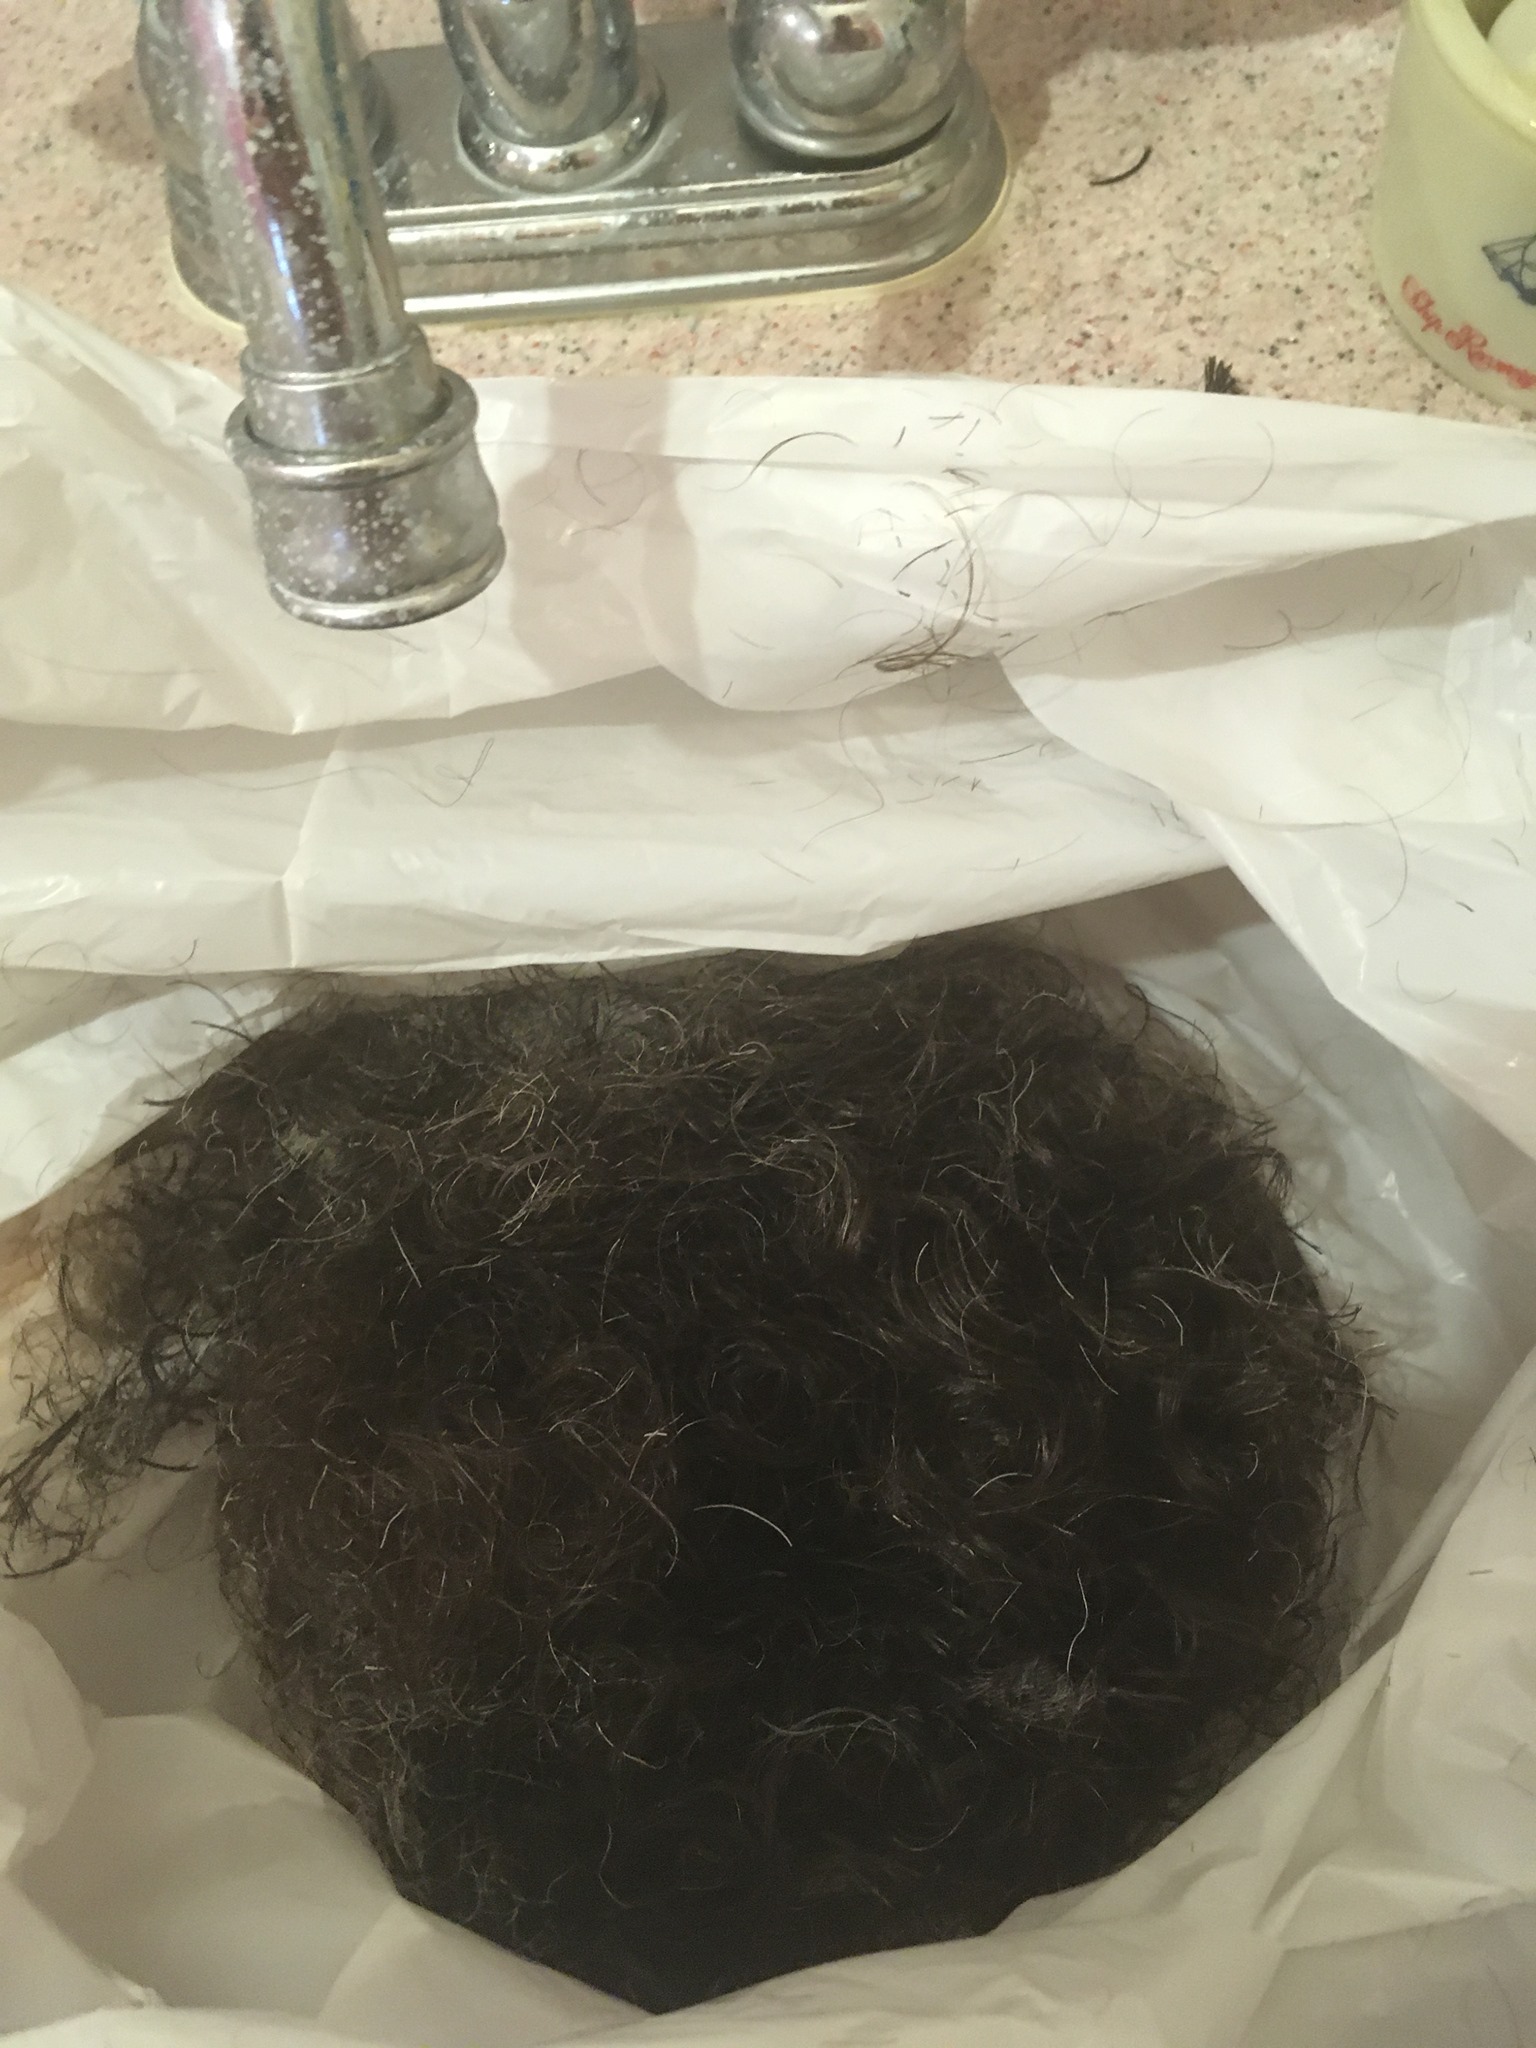 A bag of mostly black, curly hair, with some grey scattered throughout.  The bag is sitting in a kitchen sink.  There appears to be enough hair to make a whole head.